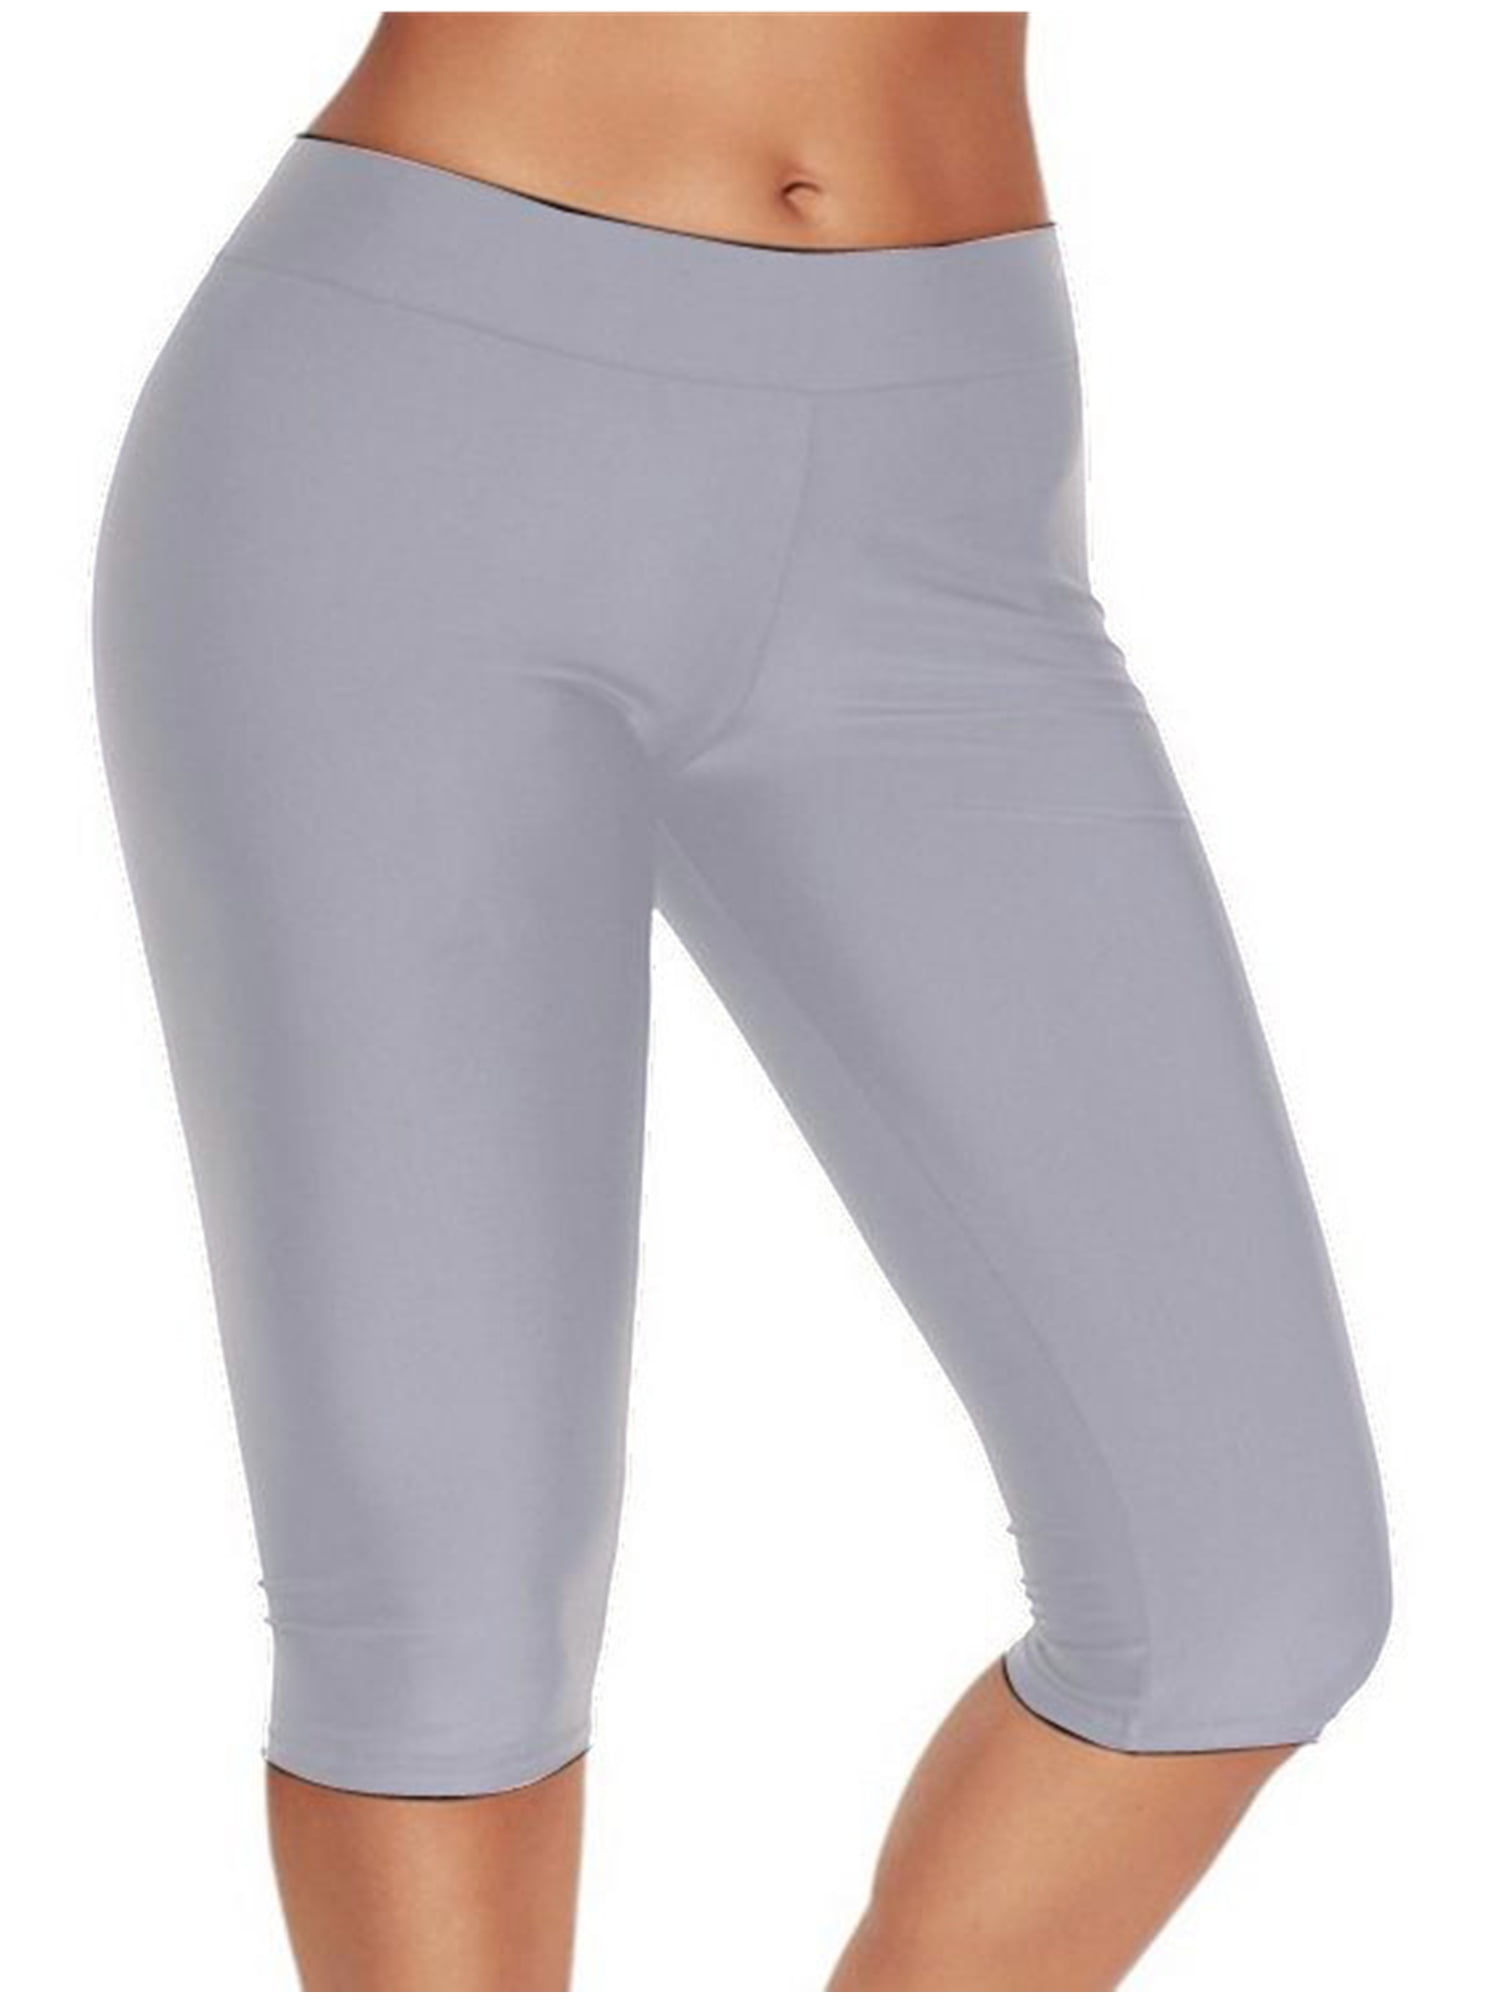 LADIES CYCLING COTTON STRETCHY LYCRA SHORT ACTIVE CASUAL SPORTS WOMEN'S LEGGINGS 